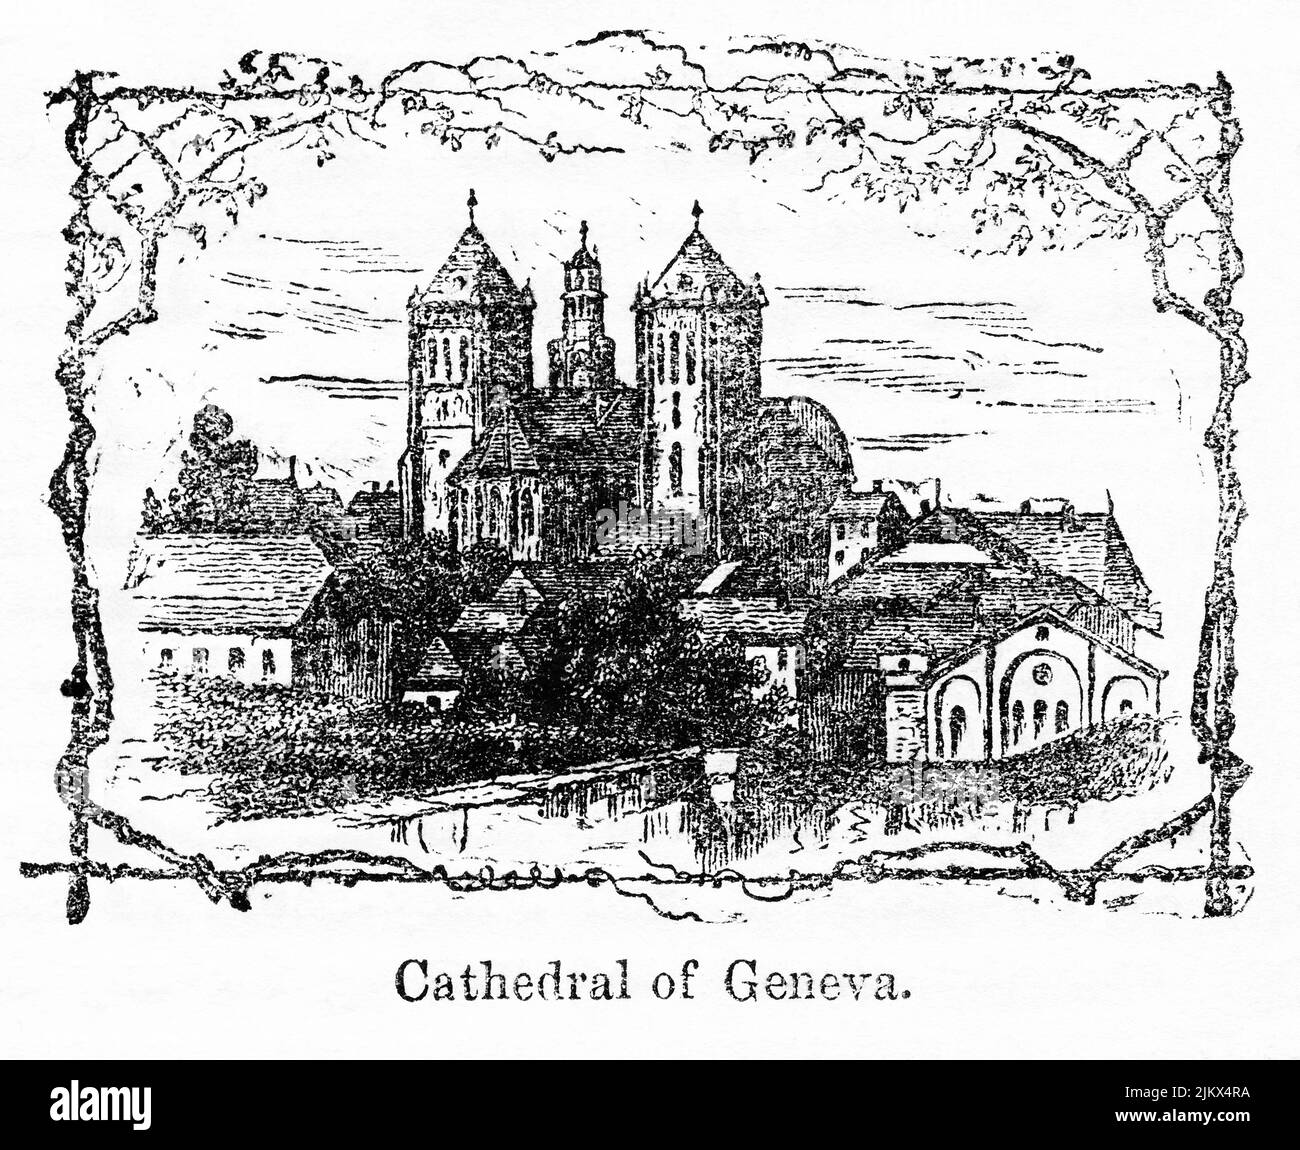 Cathedral of Geneva, Illustration from the Book, 'John Cassel’s Illustrated History of England, Volume II', text by William Howitt, Cassell, Petter, and Galpin, London, 1858 Stock Photo